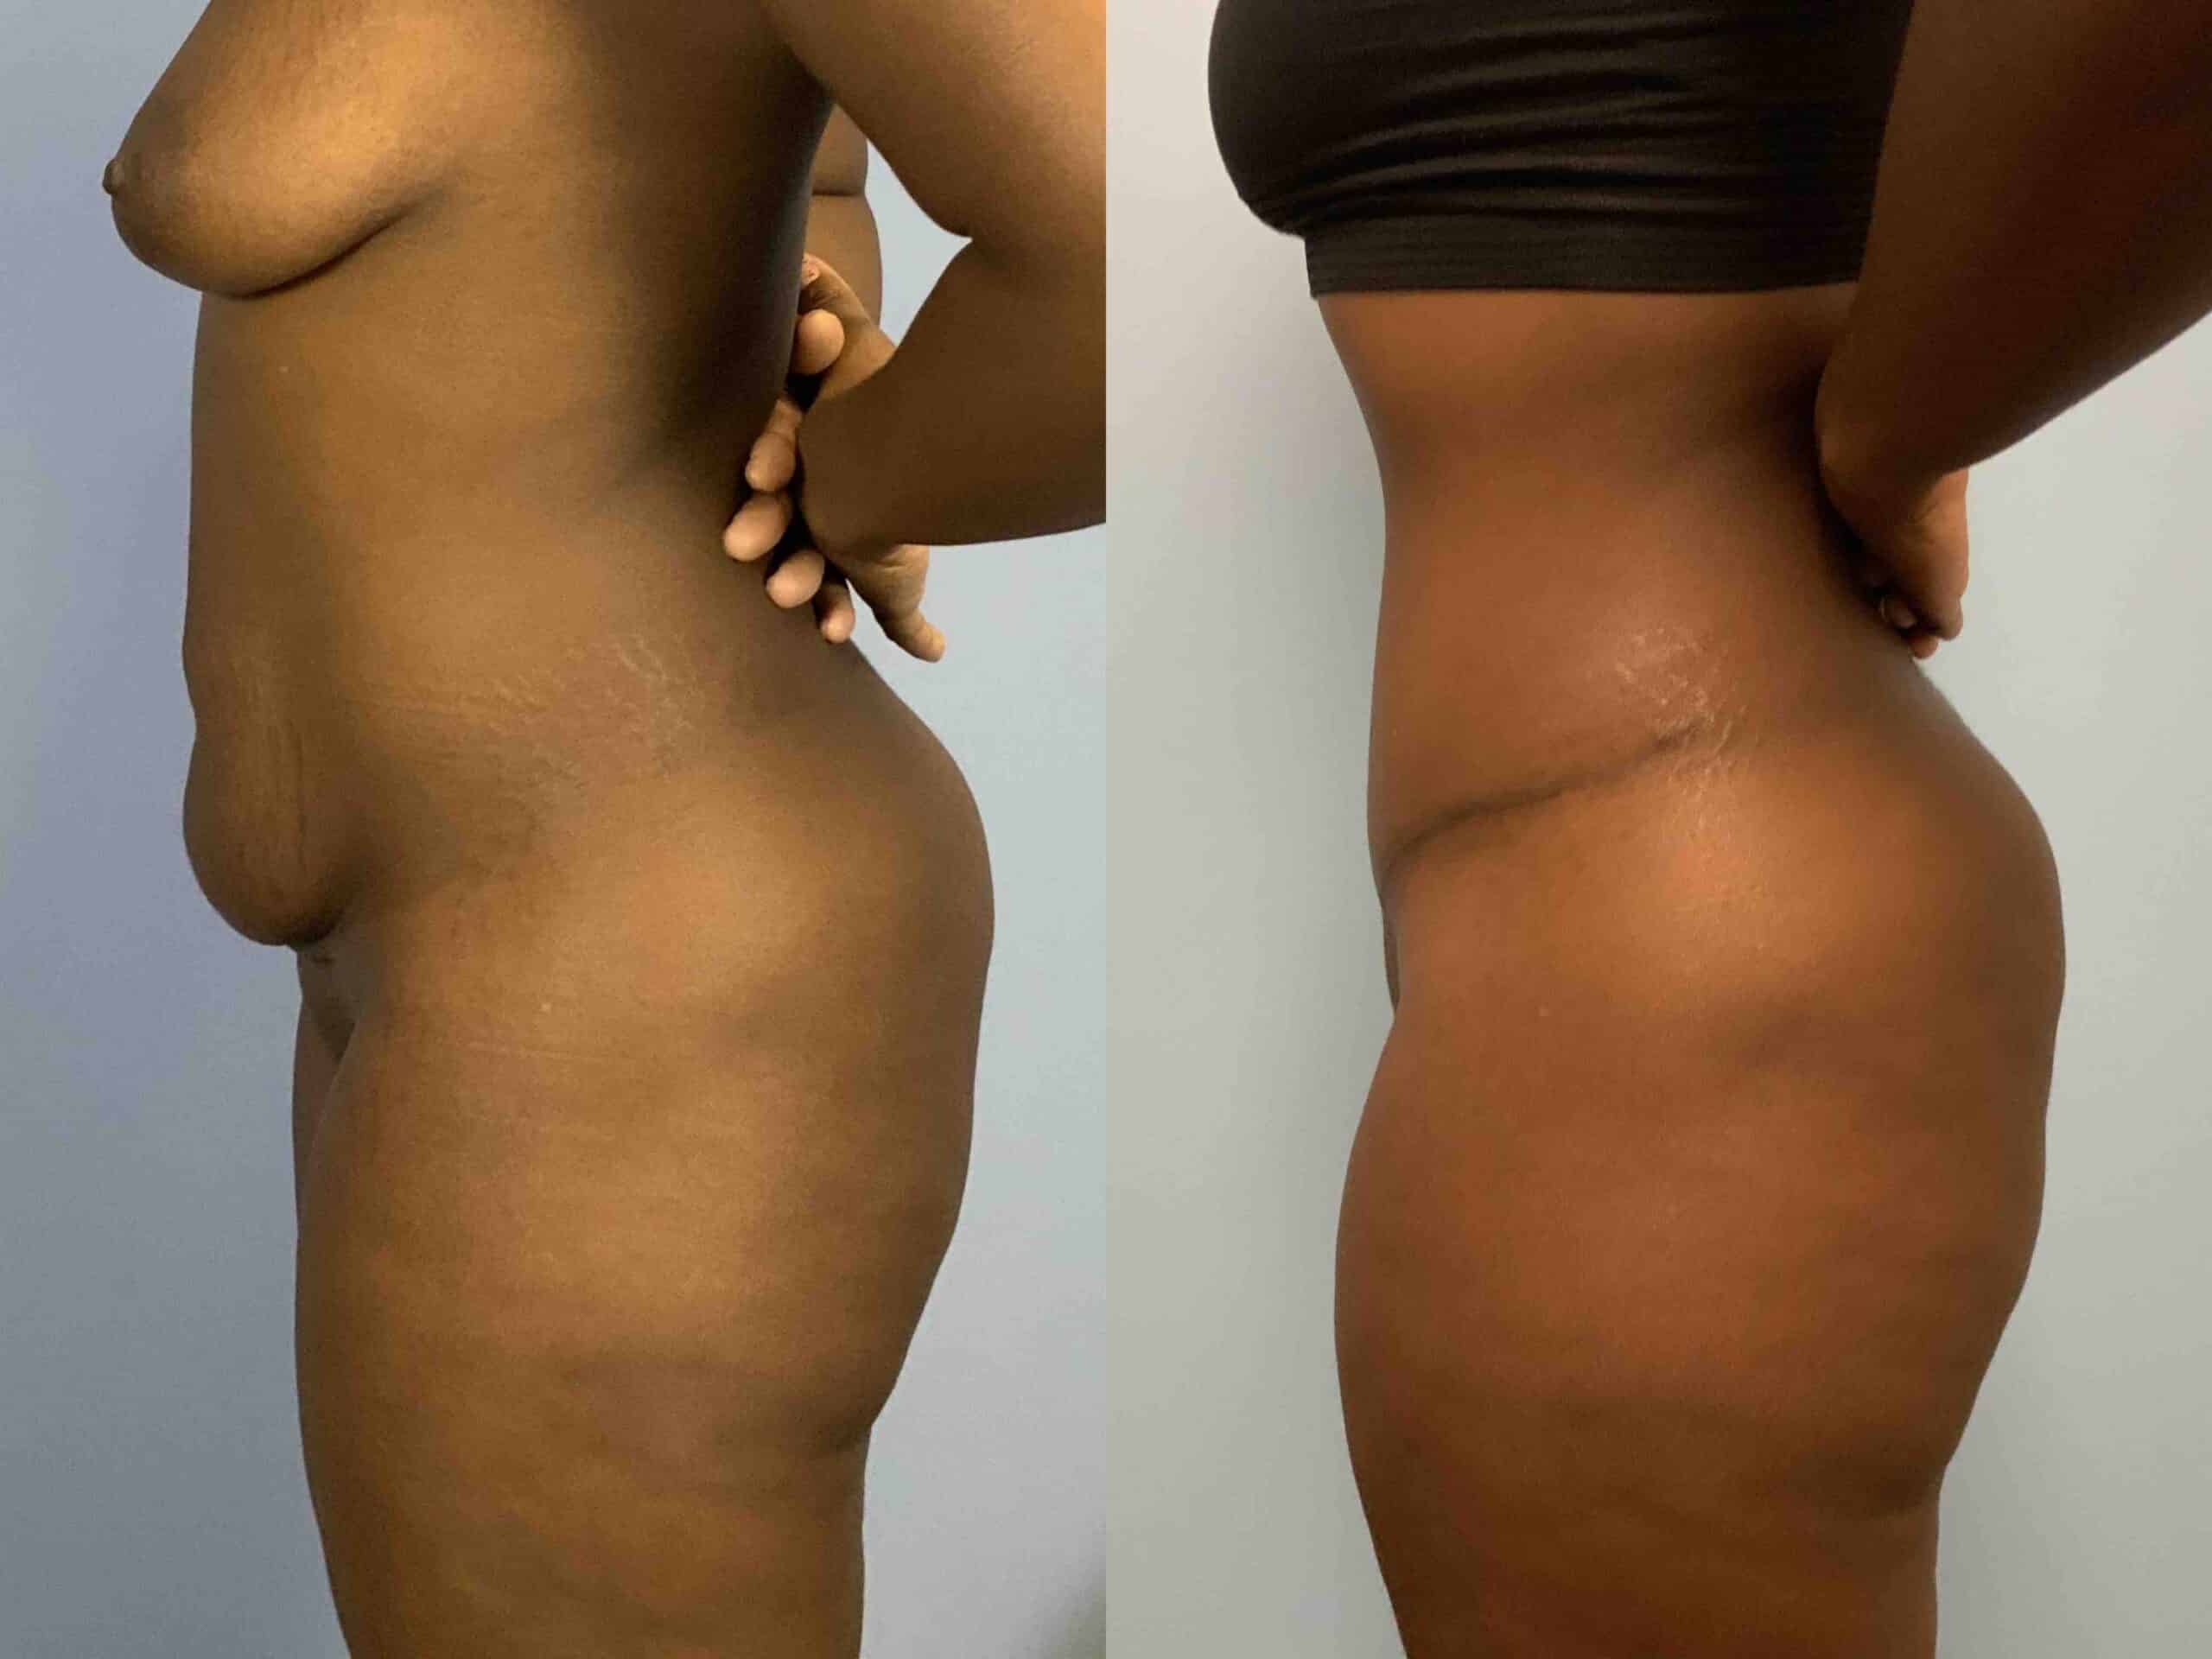 Before and after, 1 year post op from Tummy Tuck performed by Dr. Paul Vanek (side view)